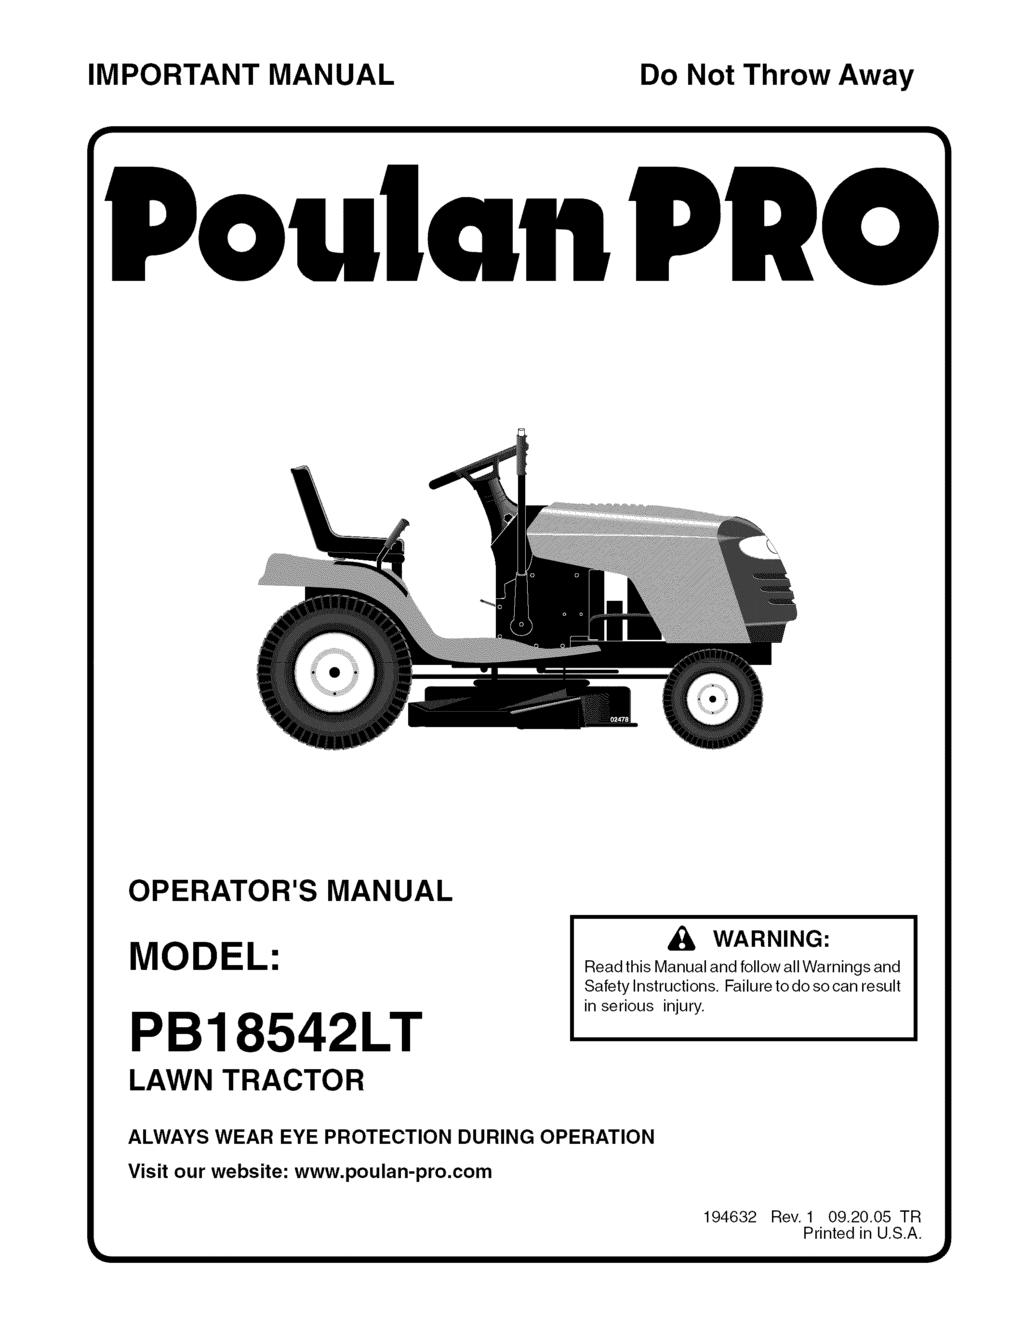 IMPORTANT MANUAL Do Not Throw Away OPERATOR'S MANUAL MODEL: PB 18542 LT LAWN TRACTOR WARNING: Read this Manual and follow all Warnings and Safety Instructions,